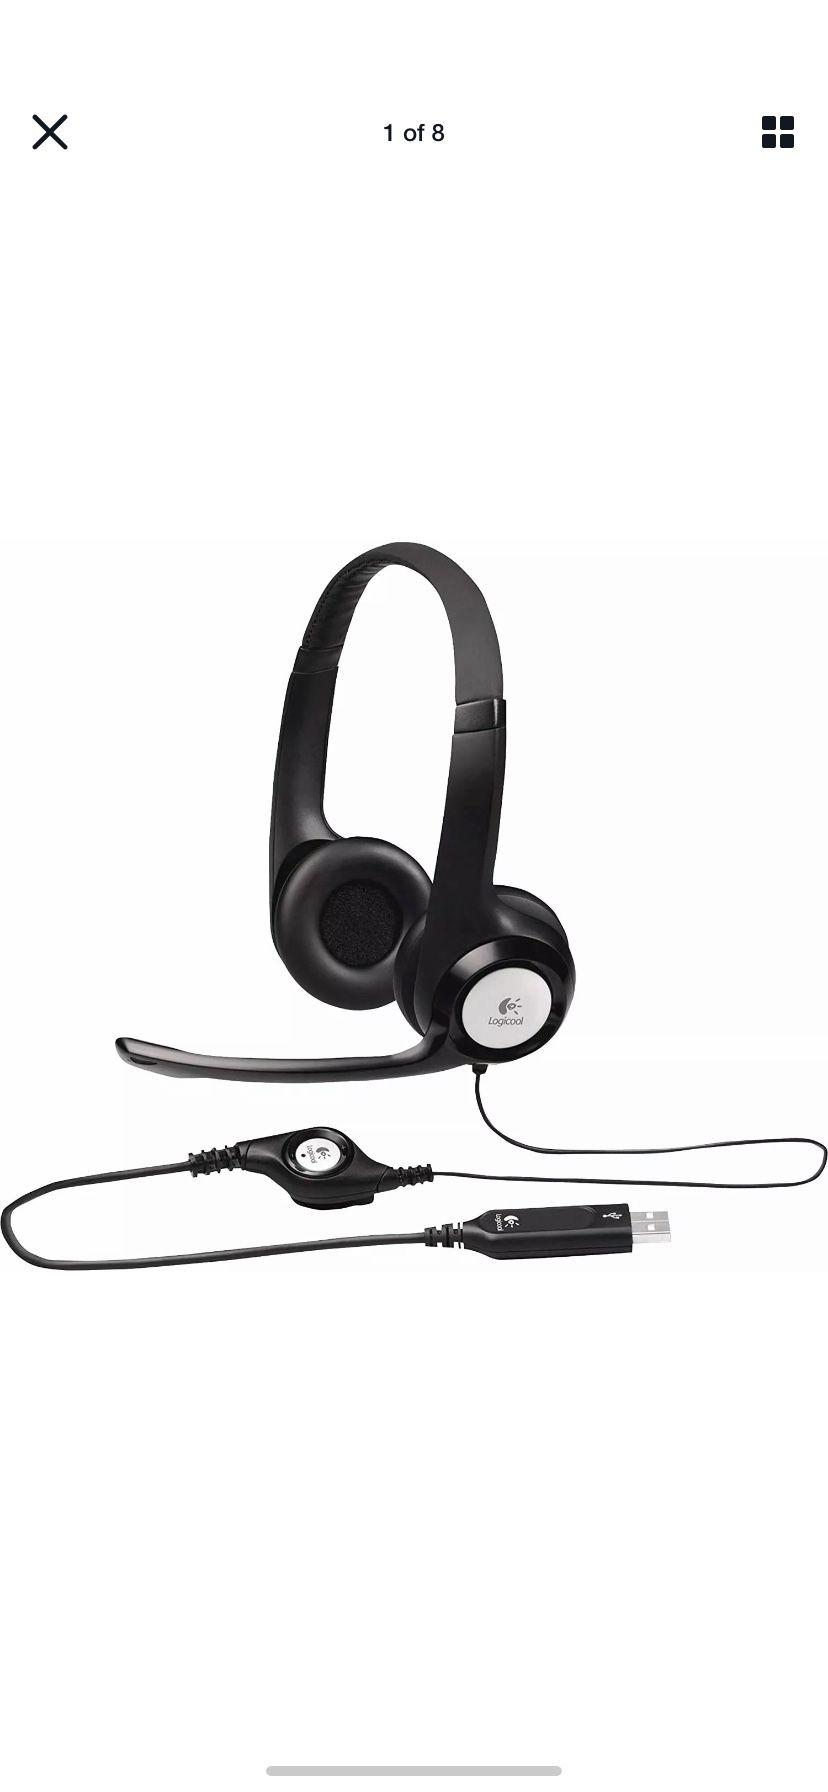 Logitech USB Headset H390 with Noise Cancelling Mic | USA | ready to ship